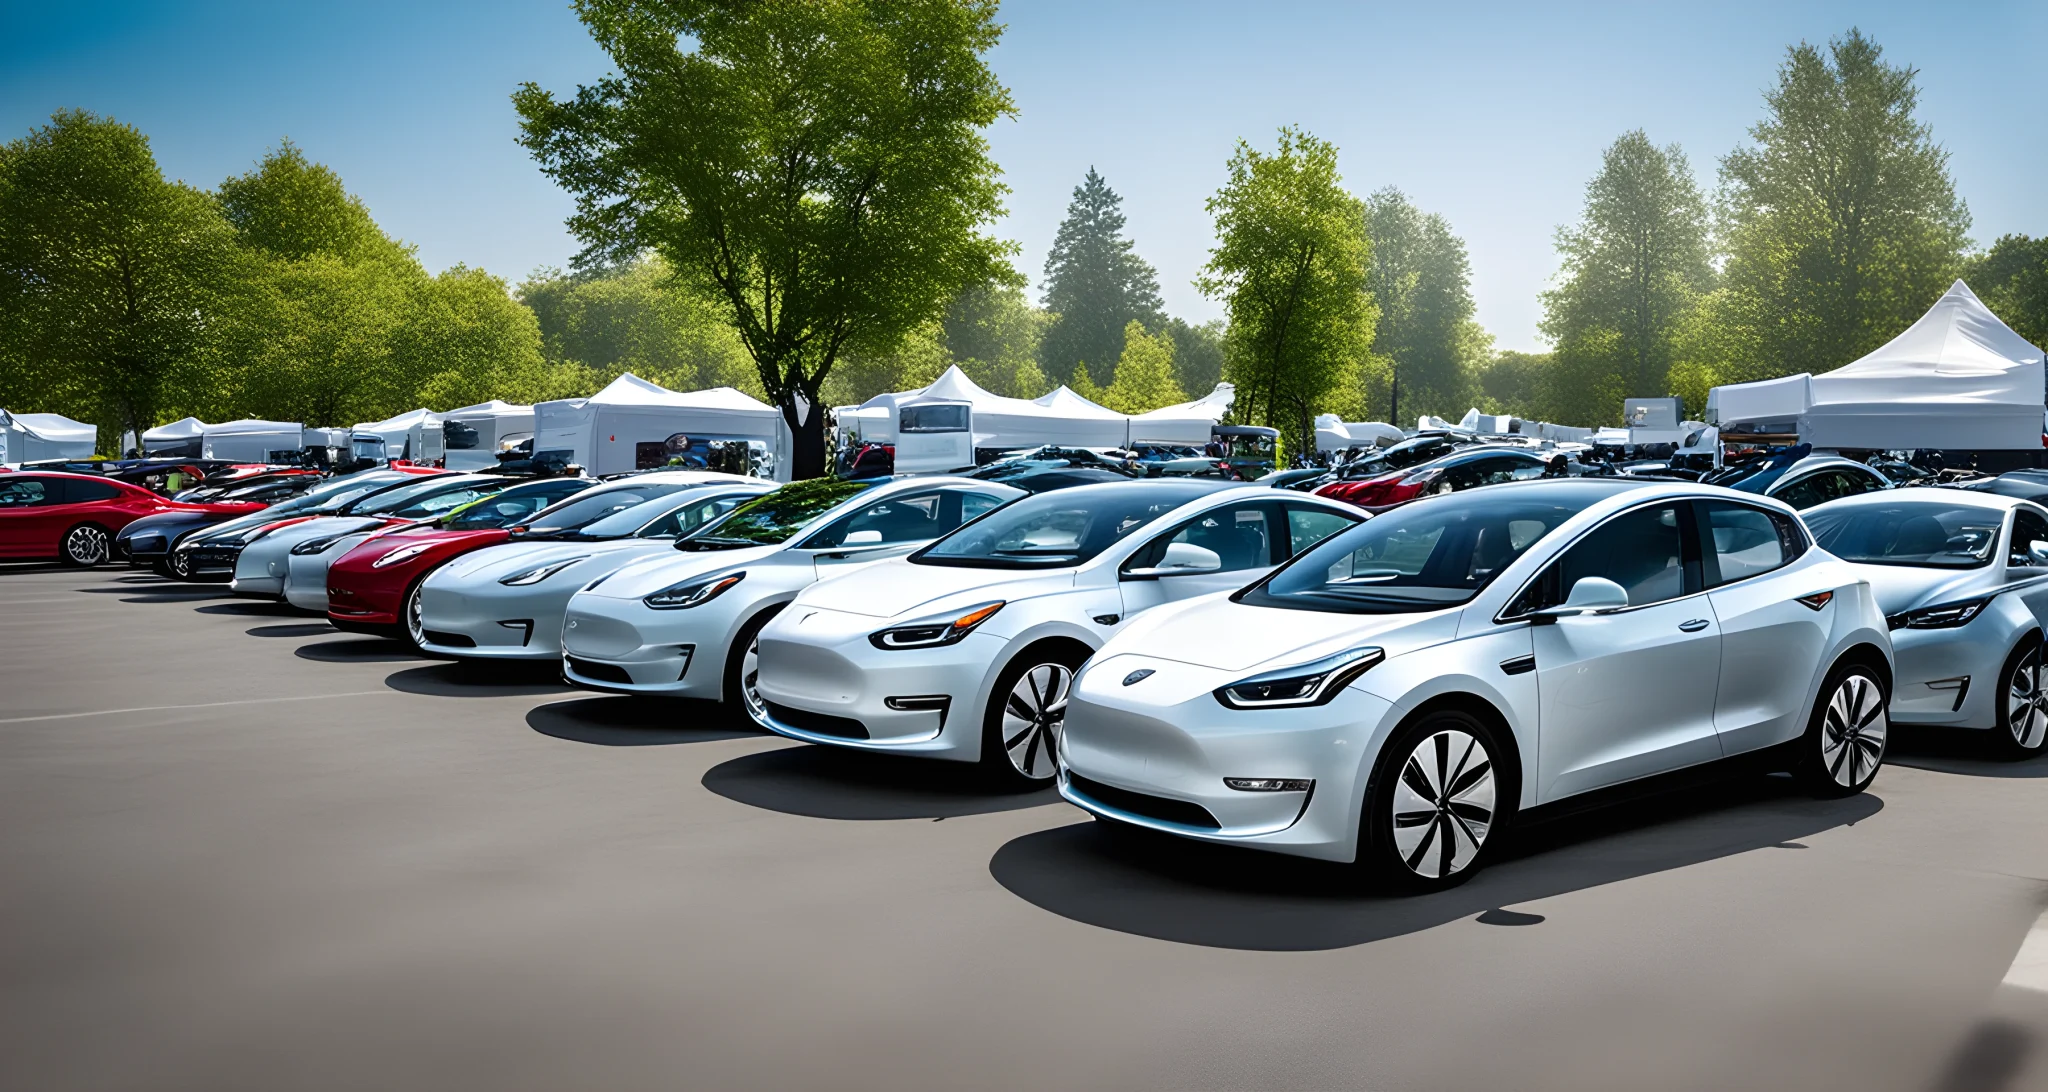 The image features a lineup of electric vehicles (EVs) on display at a car show, including various models from different manufacturers.